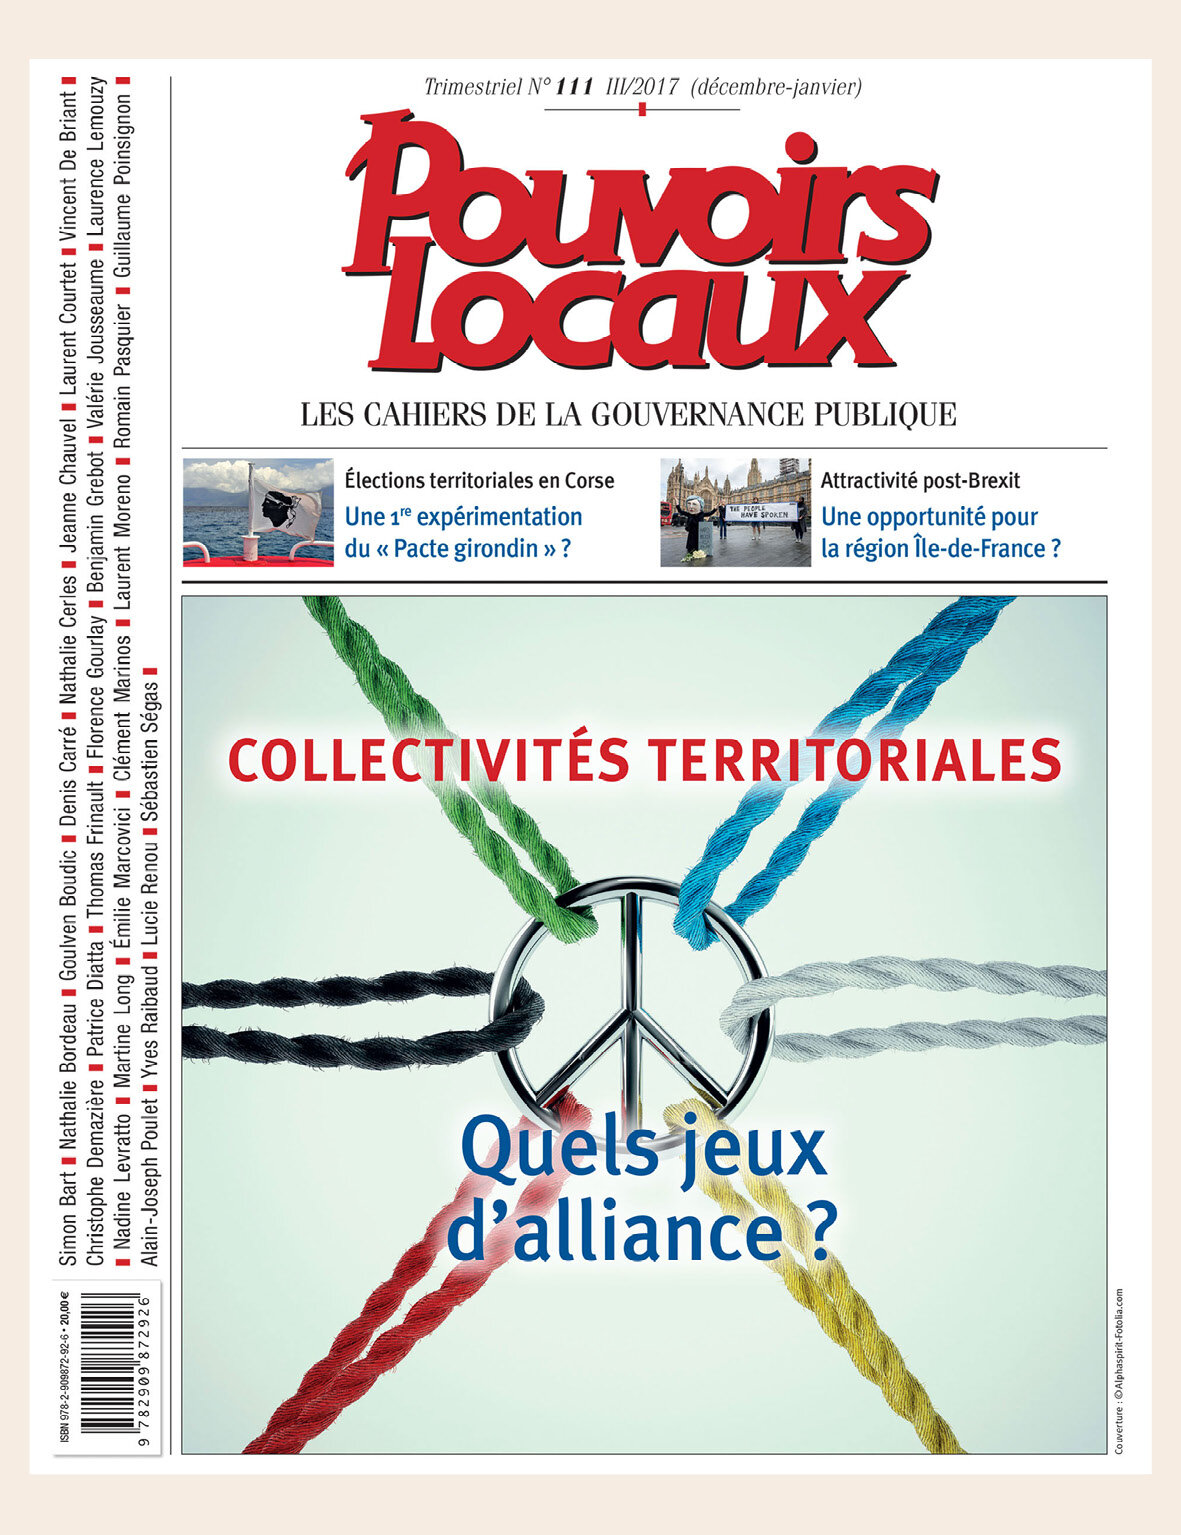 Carrousel_pages_mag3.jpg